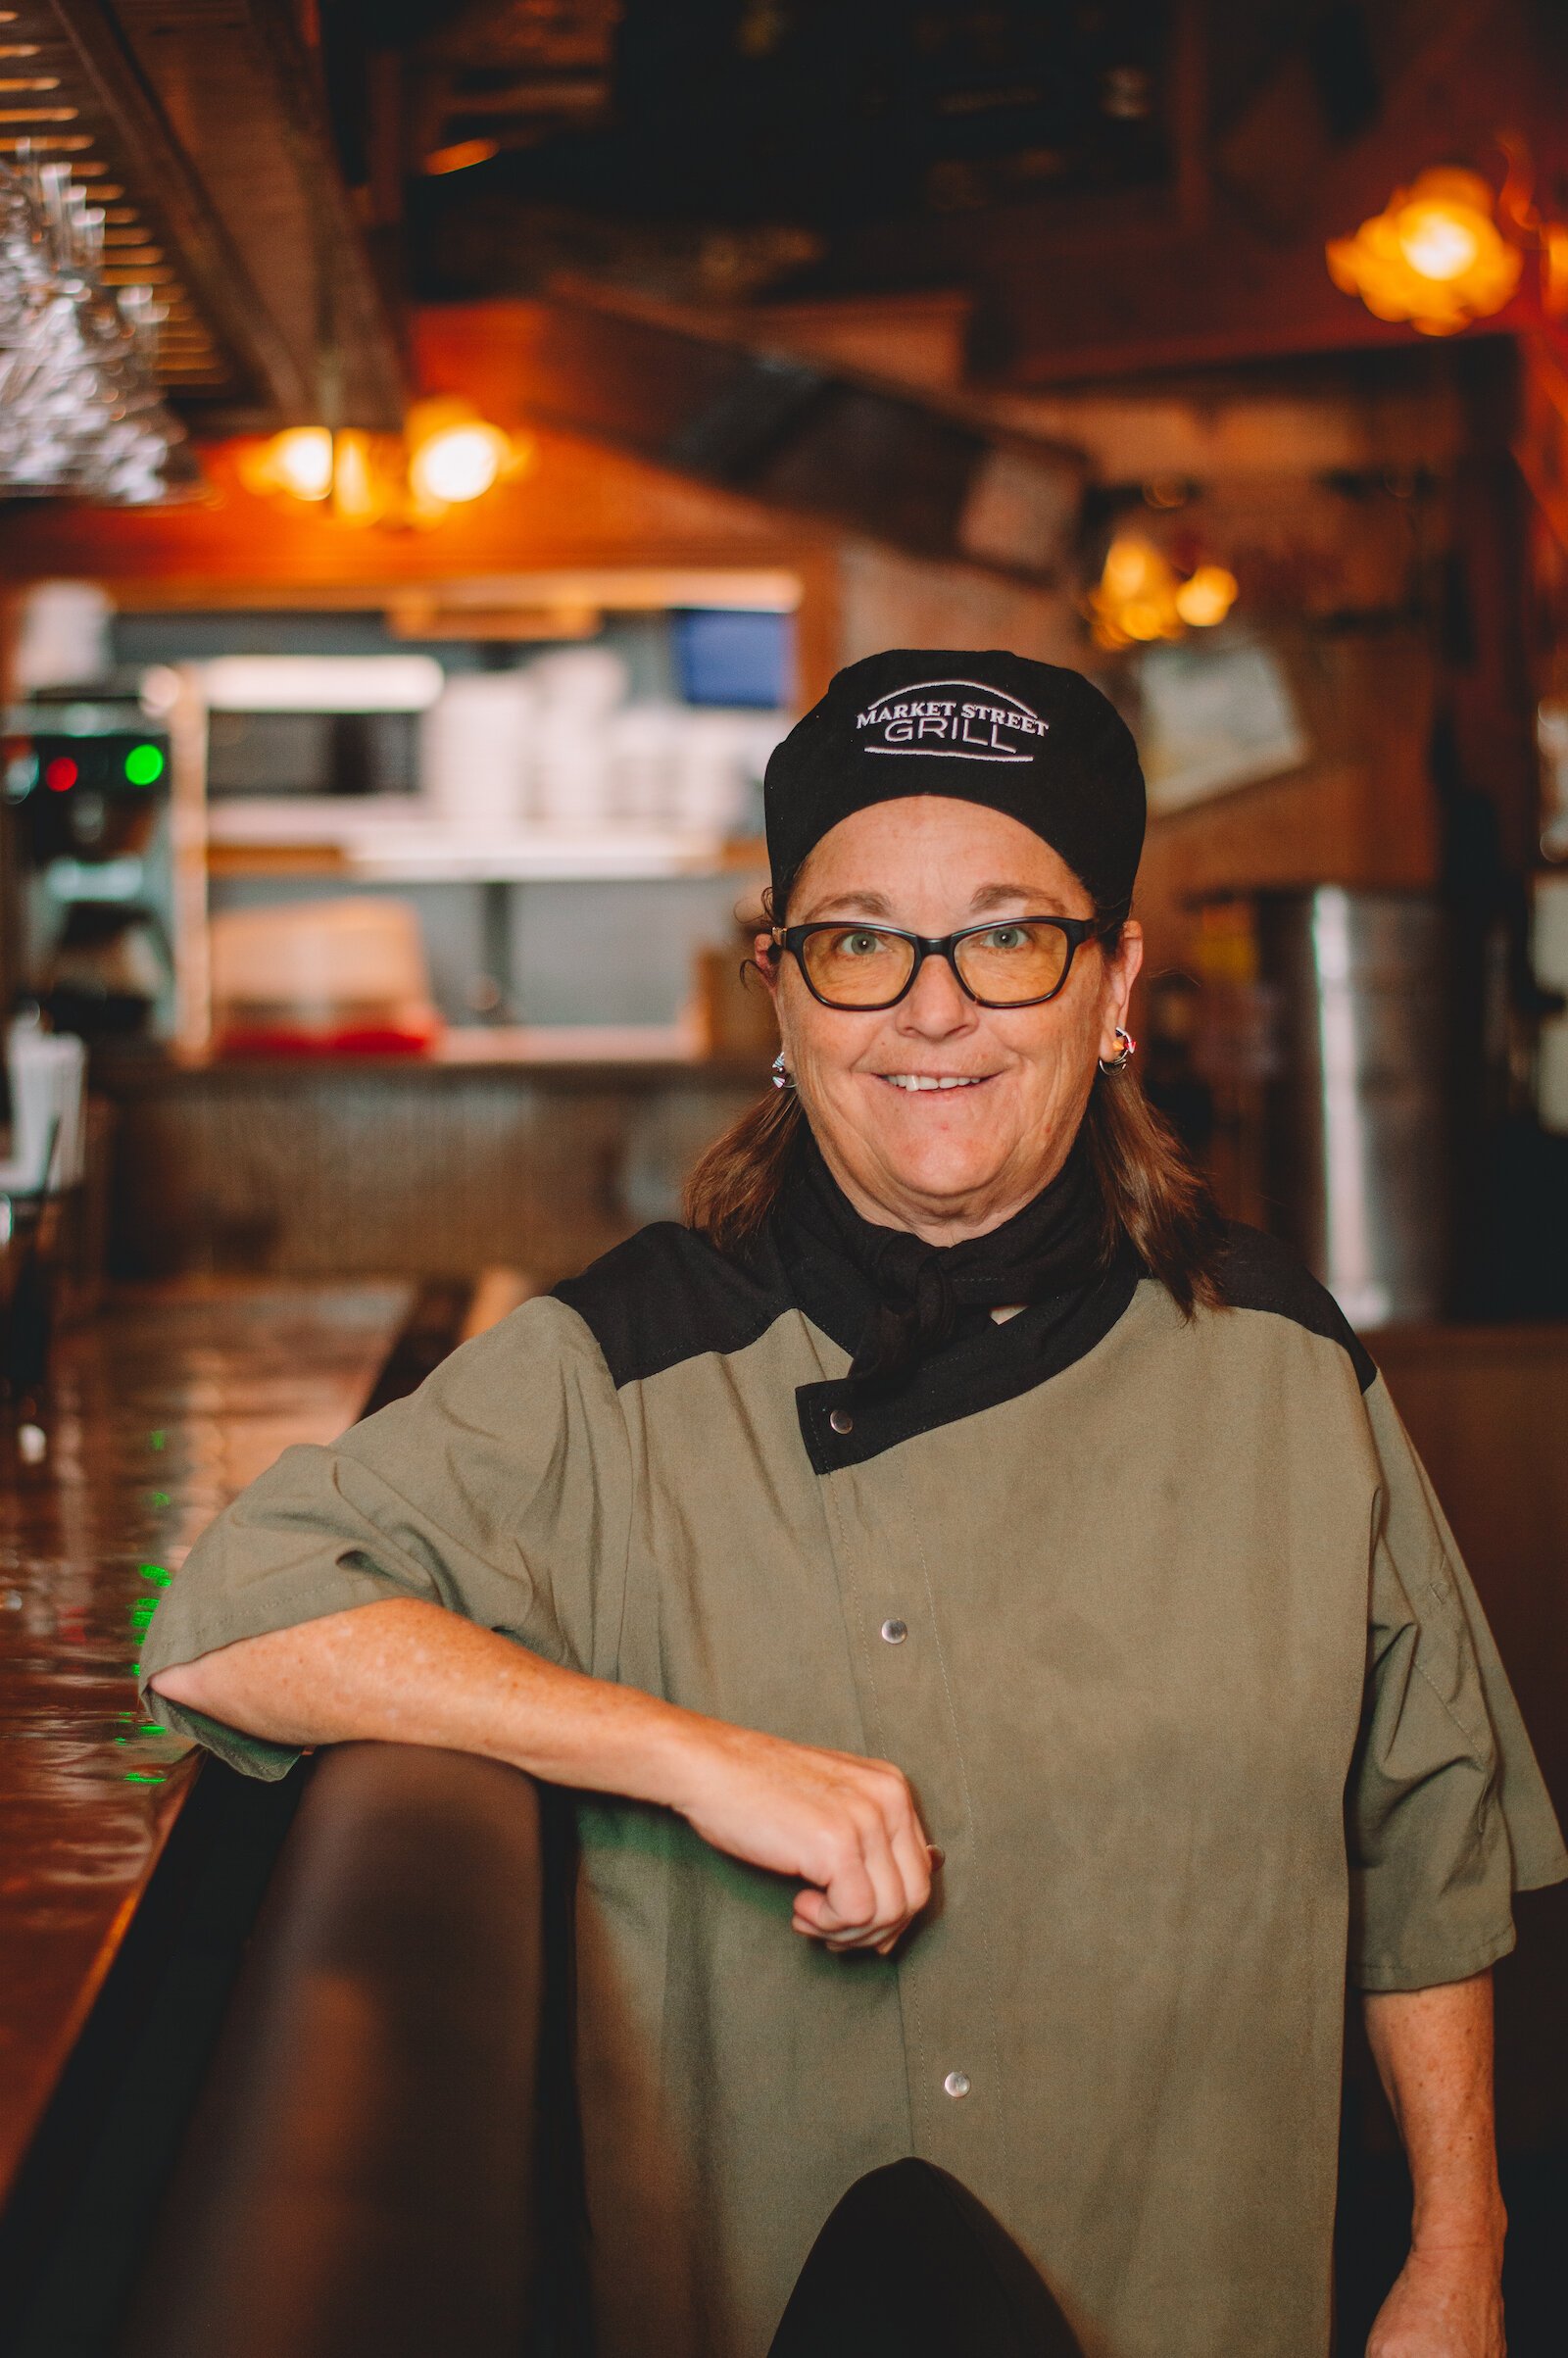 Marcy Rife, Executive Chef at Market Street Grill